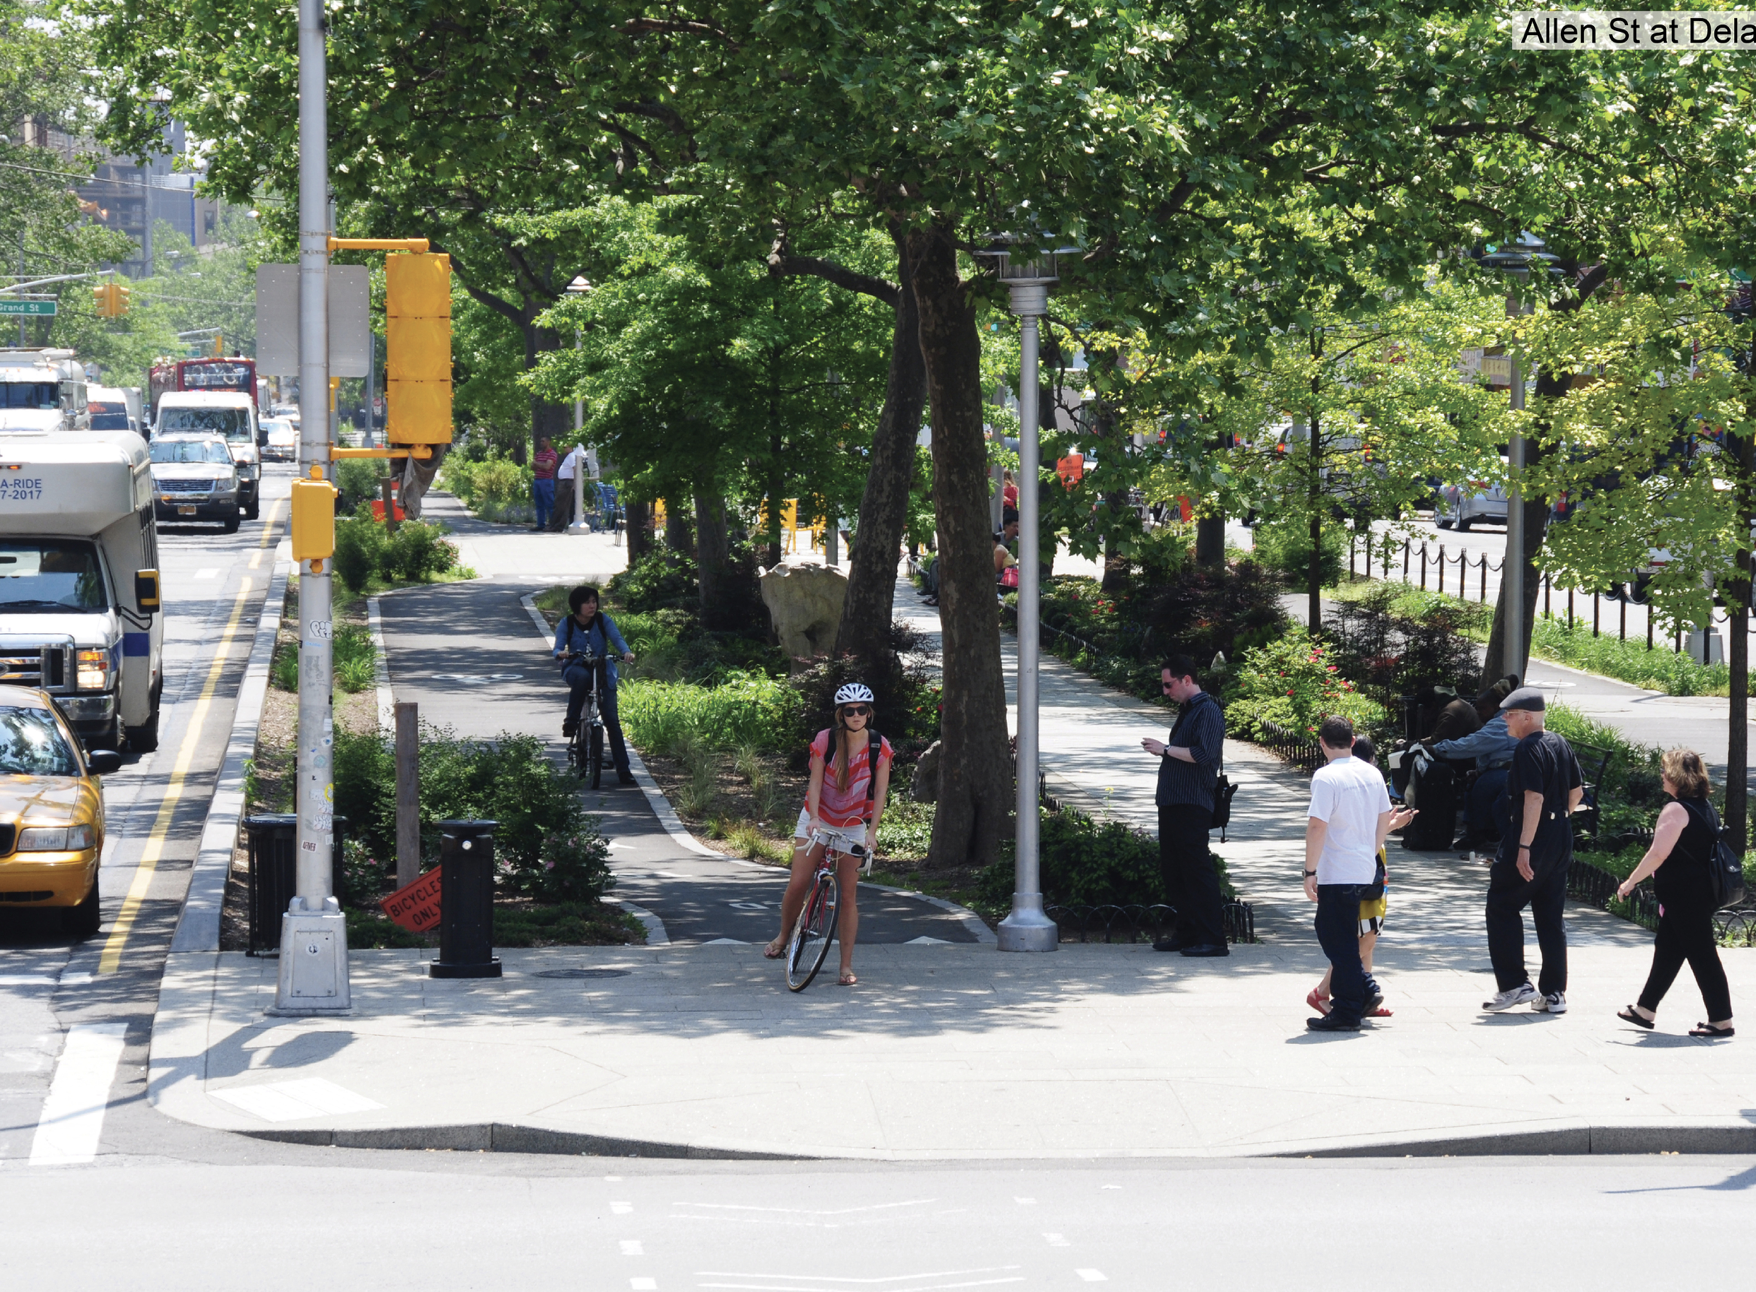 The writer would prefer to bike along the curb. Photo: DOT